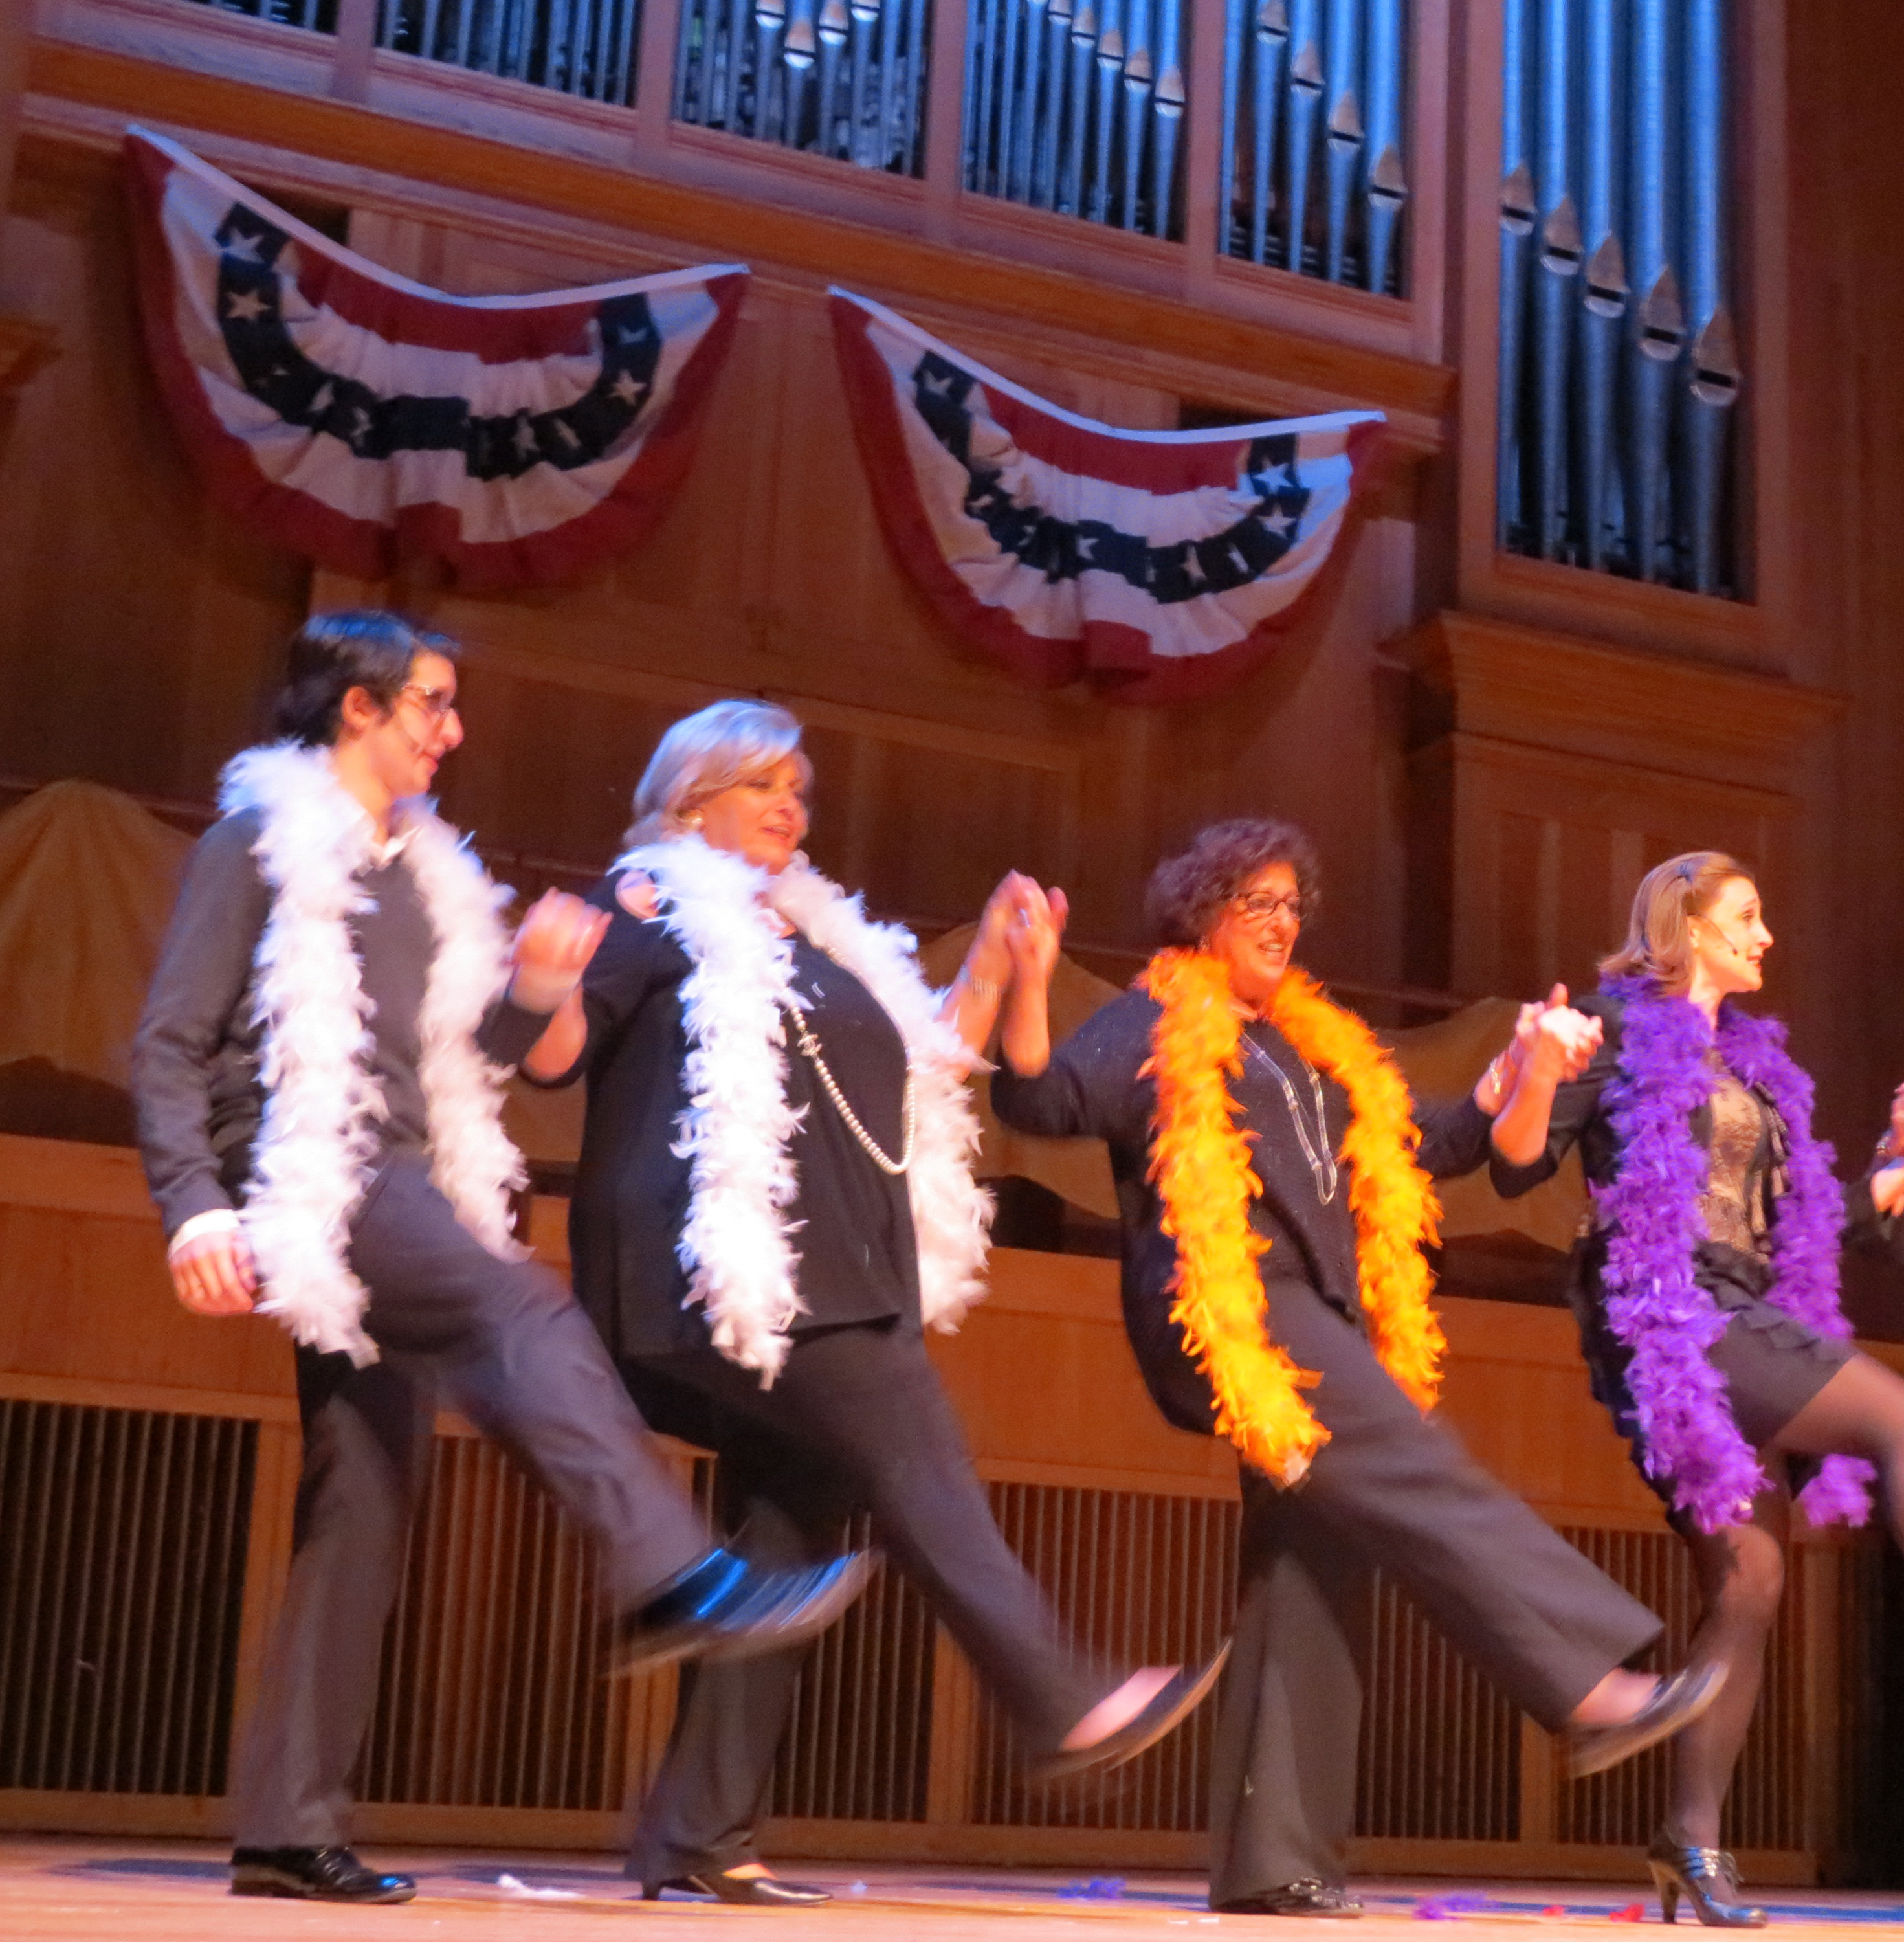 Assemblywoman Audrey Pheffer, third from left, and other performers got many a chuckle while flinging their boas around while dancing.